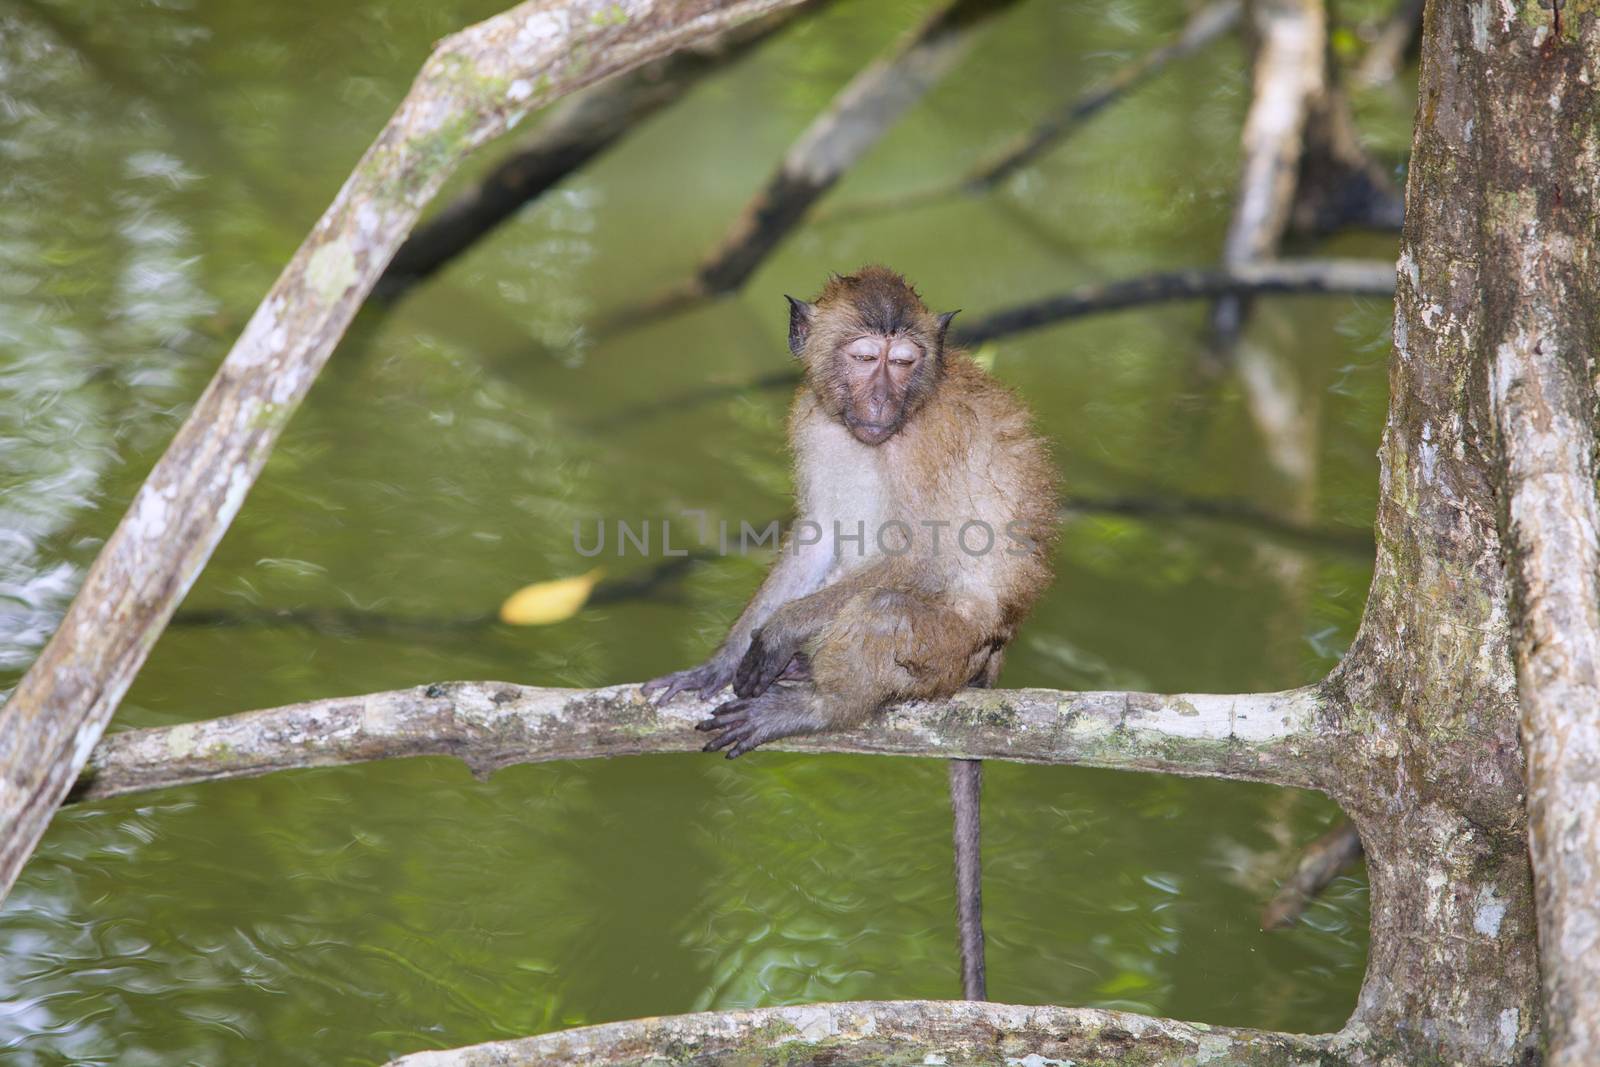 Monkey in Mangrove Forest by jee1999